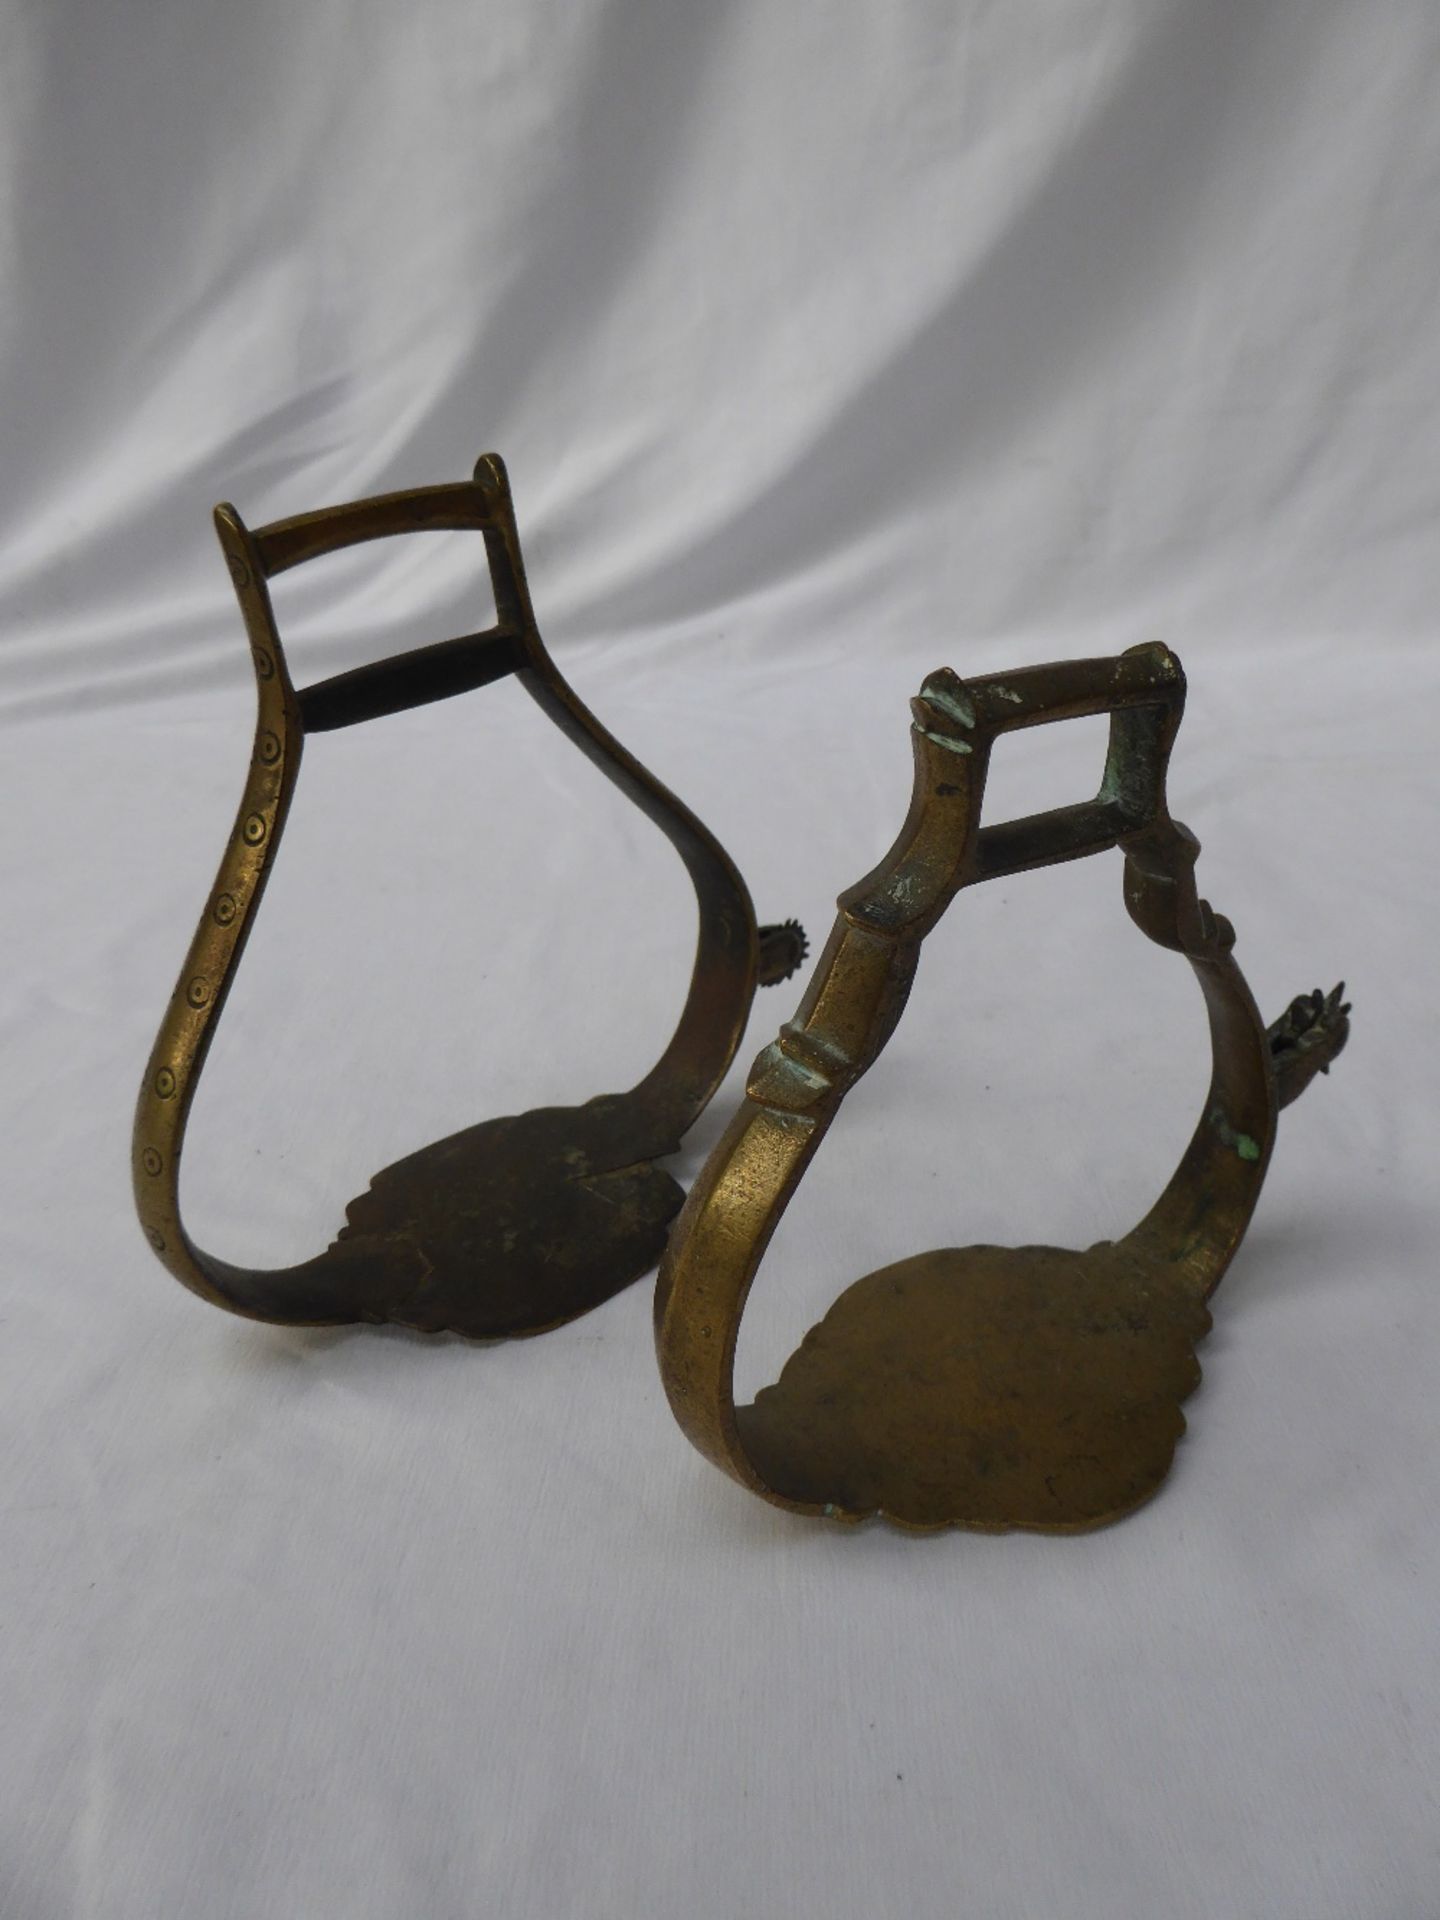 2 South American stirrups with rowelled spurs incorporated in the sides. - Image 3 of 5